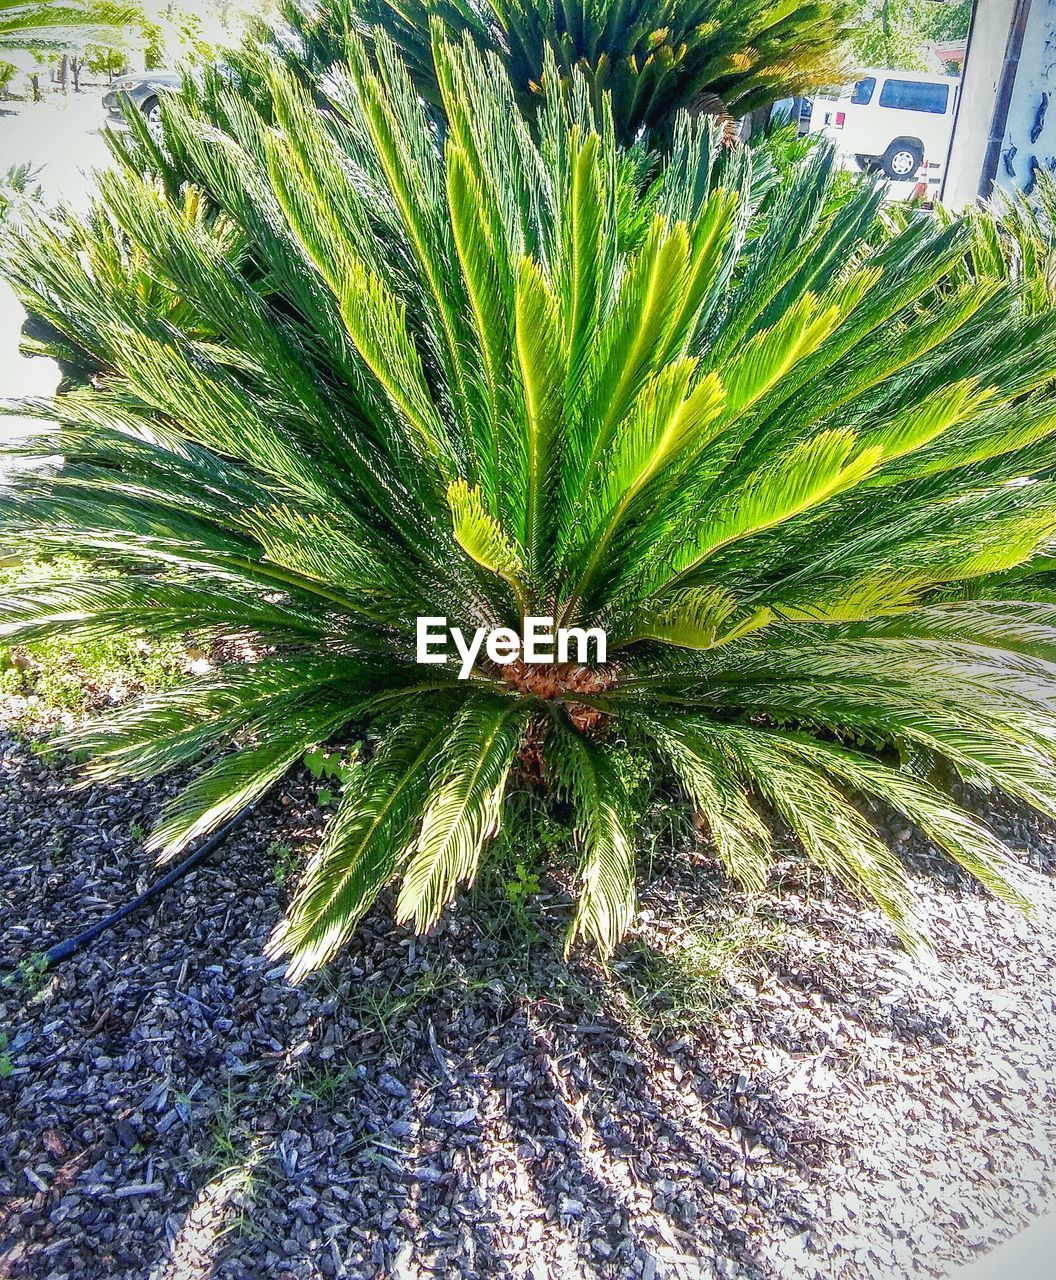 PLANT GROWING ON PALM TREE